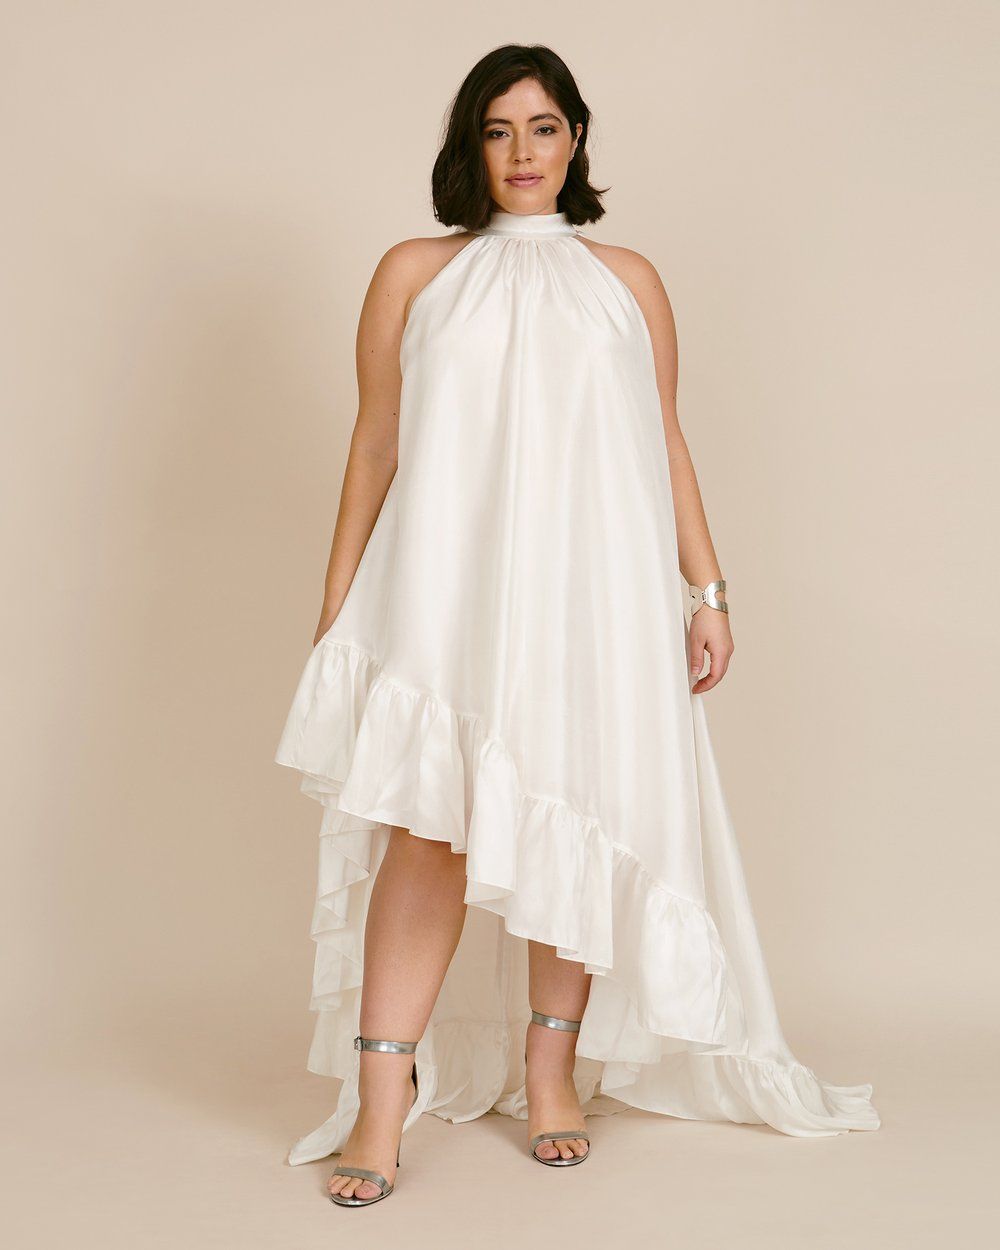 How To Pick The Best Plus Size Wedding Dress – 4 Tips From An Expert, Wedding Dresses Vermont & NH